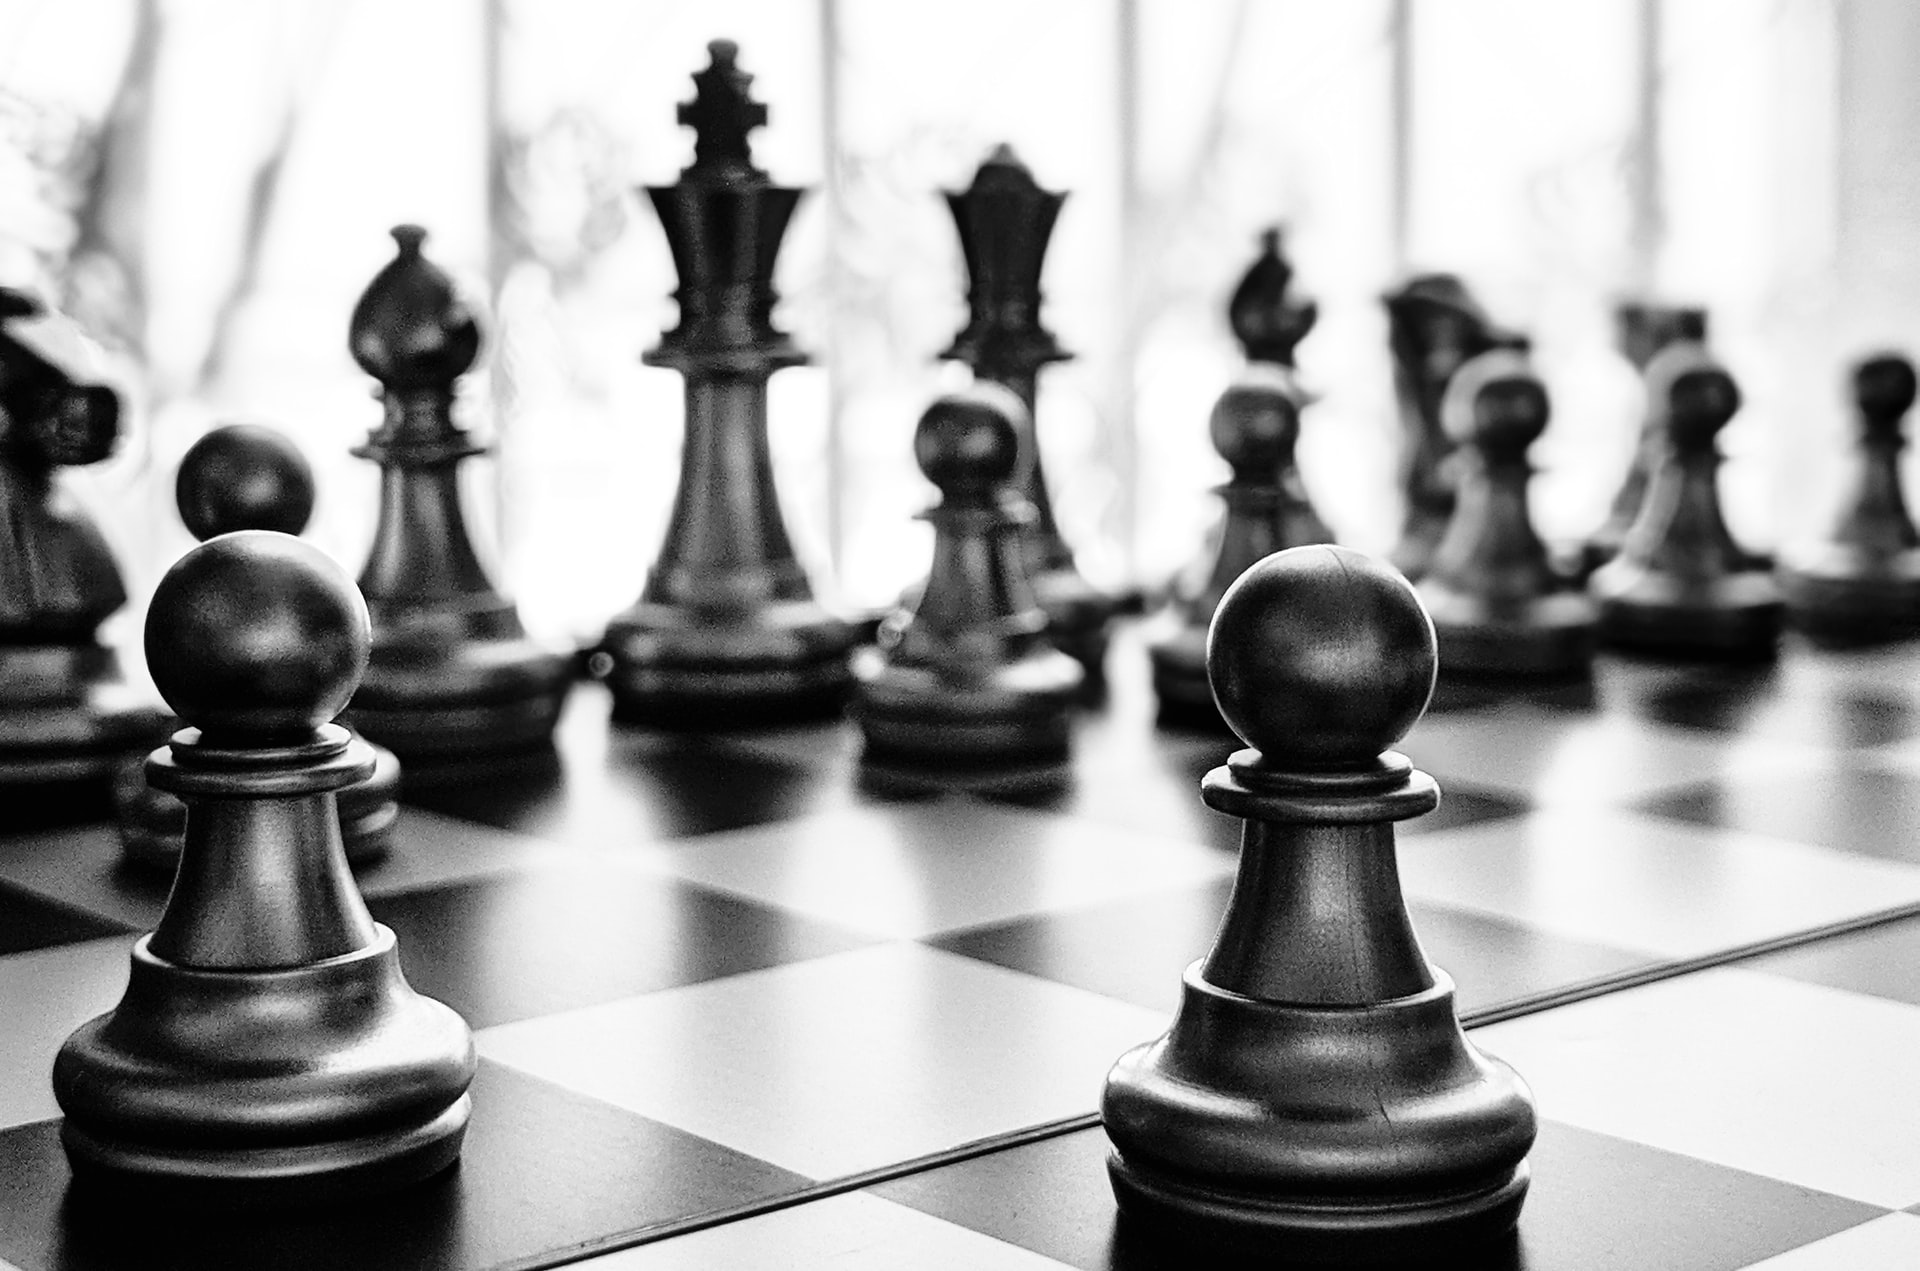 chess pieces (pawns, king and queen) illustrating senior leadership and tone from the top